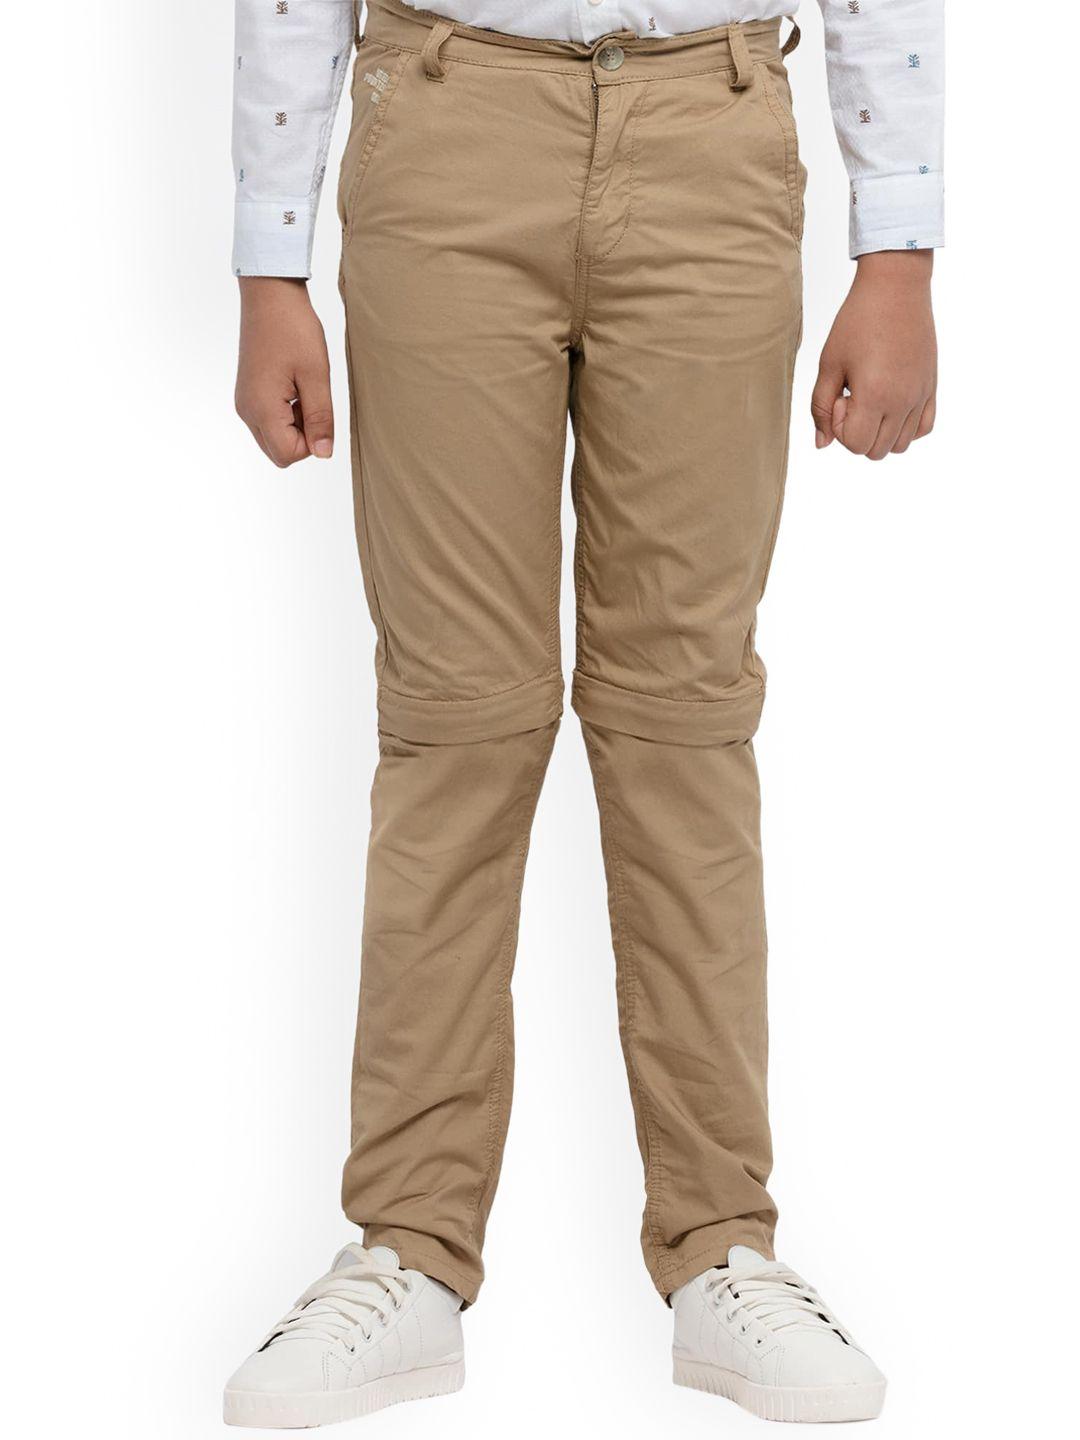 under-fourteen-only-boys-khaki-slim-fit-cotton-chinos-trousers